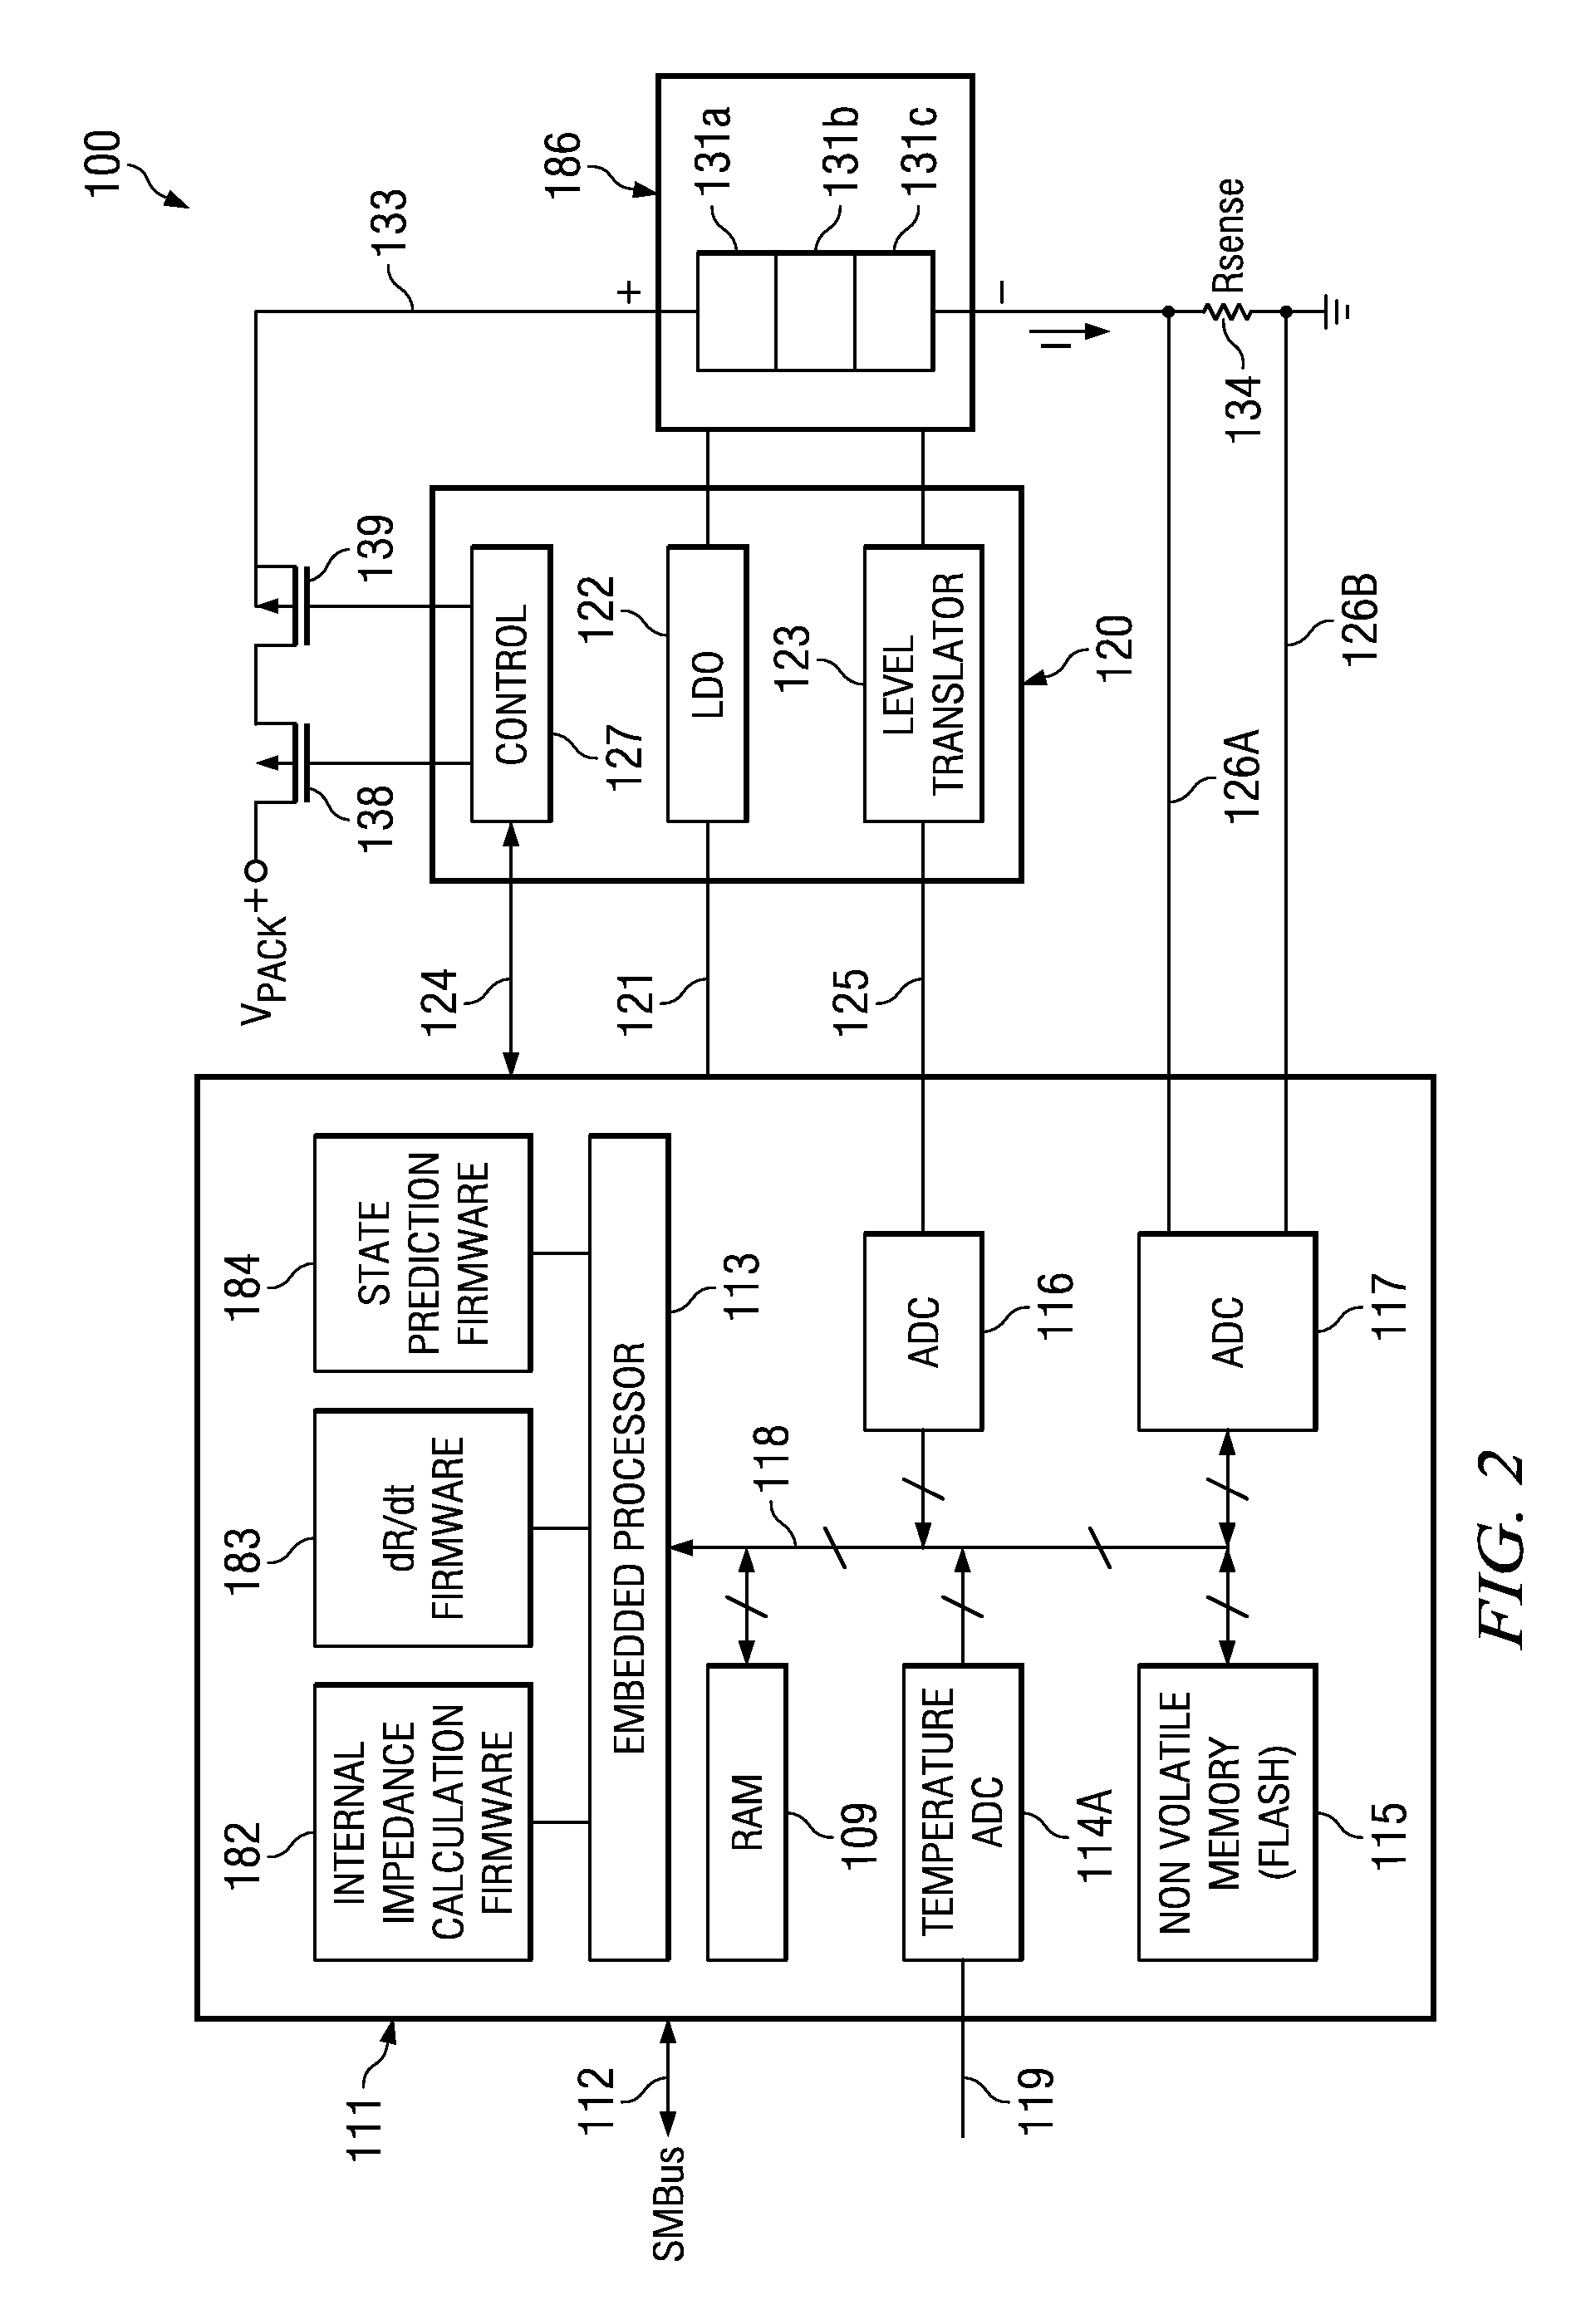 Systems, Methods and Circuits for Determining Potential Battery Failure Based on a Rate of Change of Internal Impedance